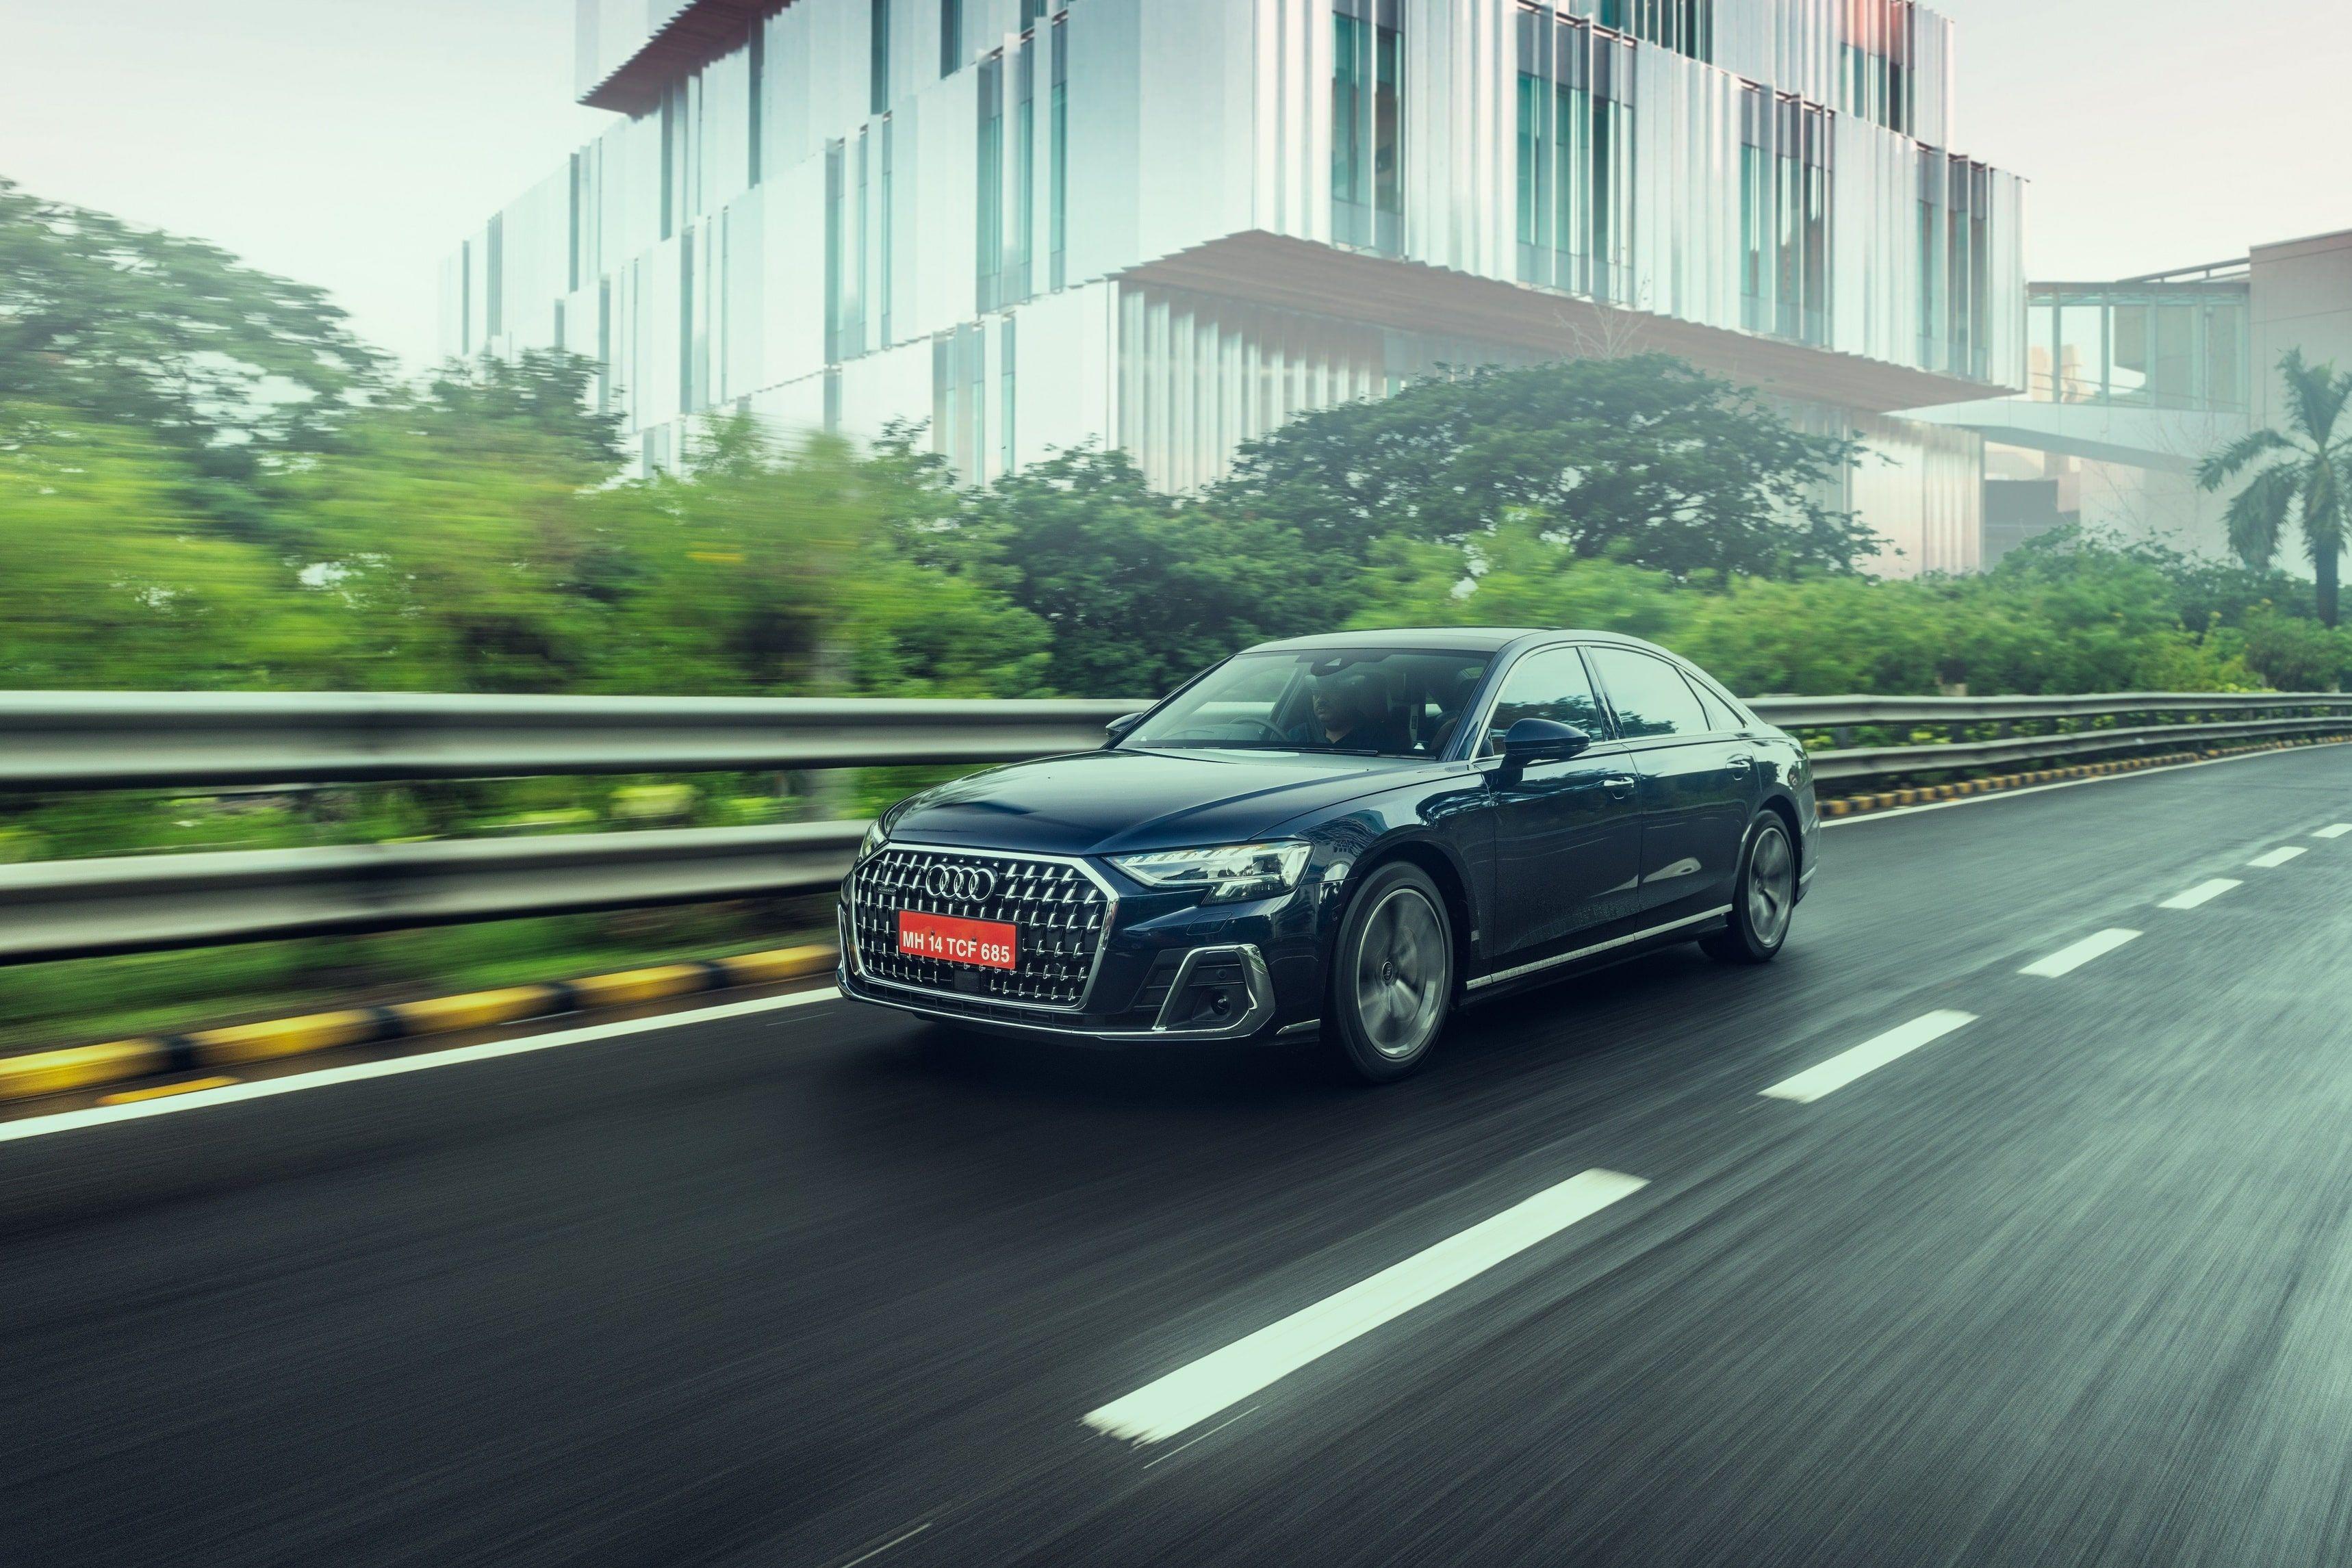 New Audi A8L Luxury Sedan in India: All You Need To Know